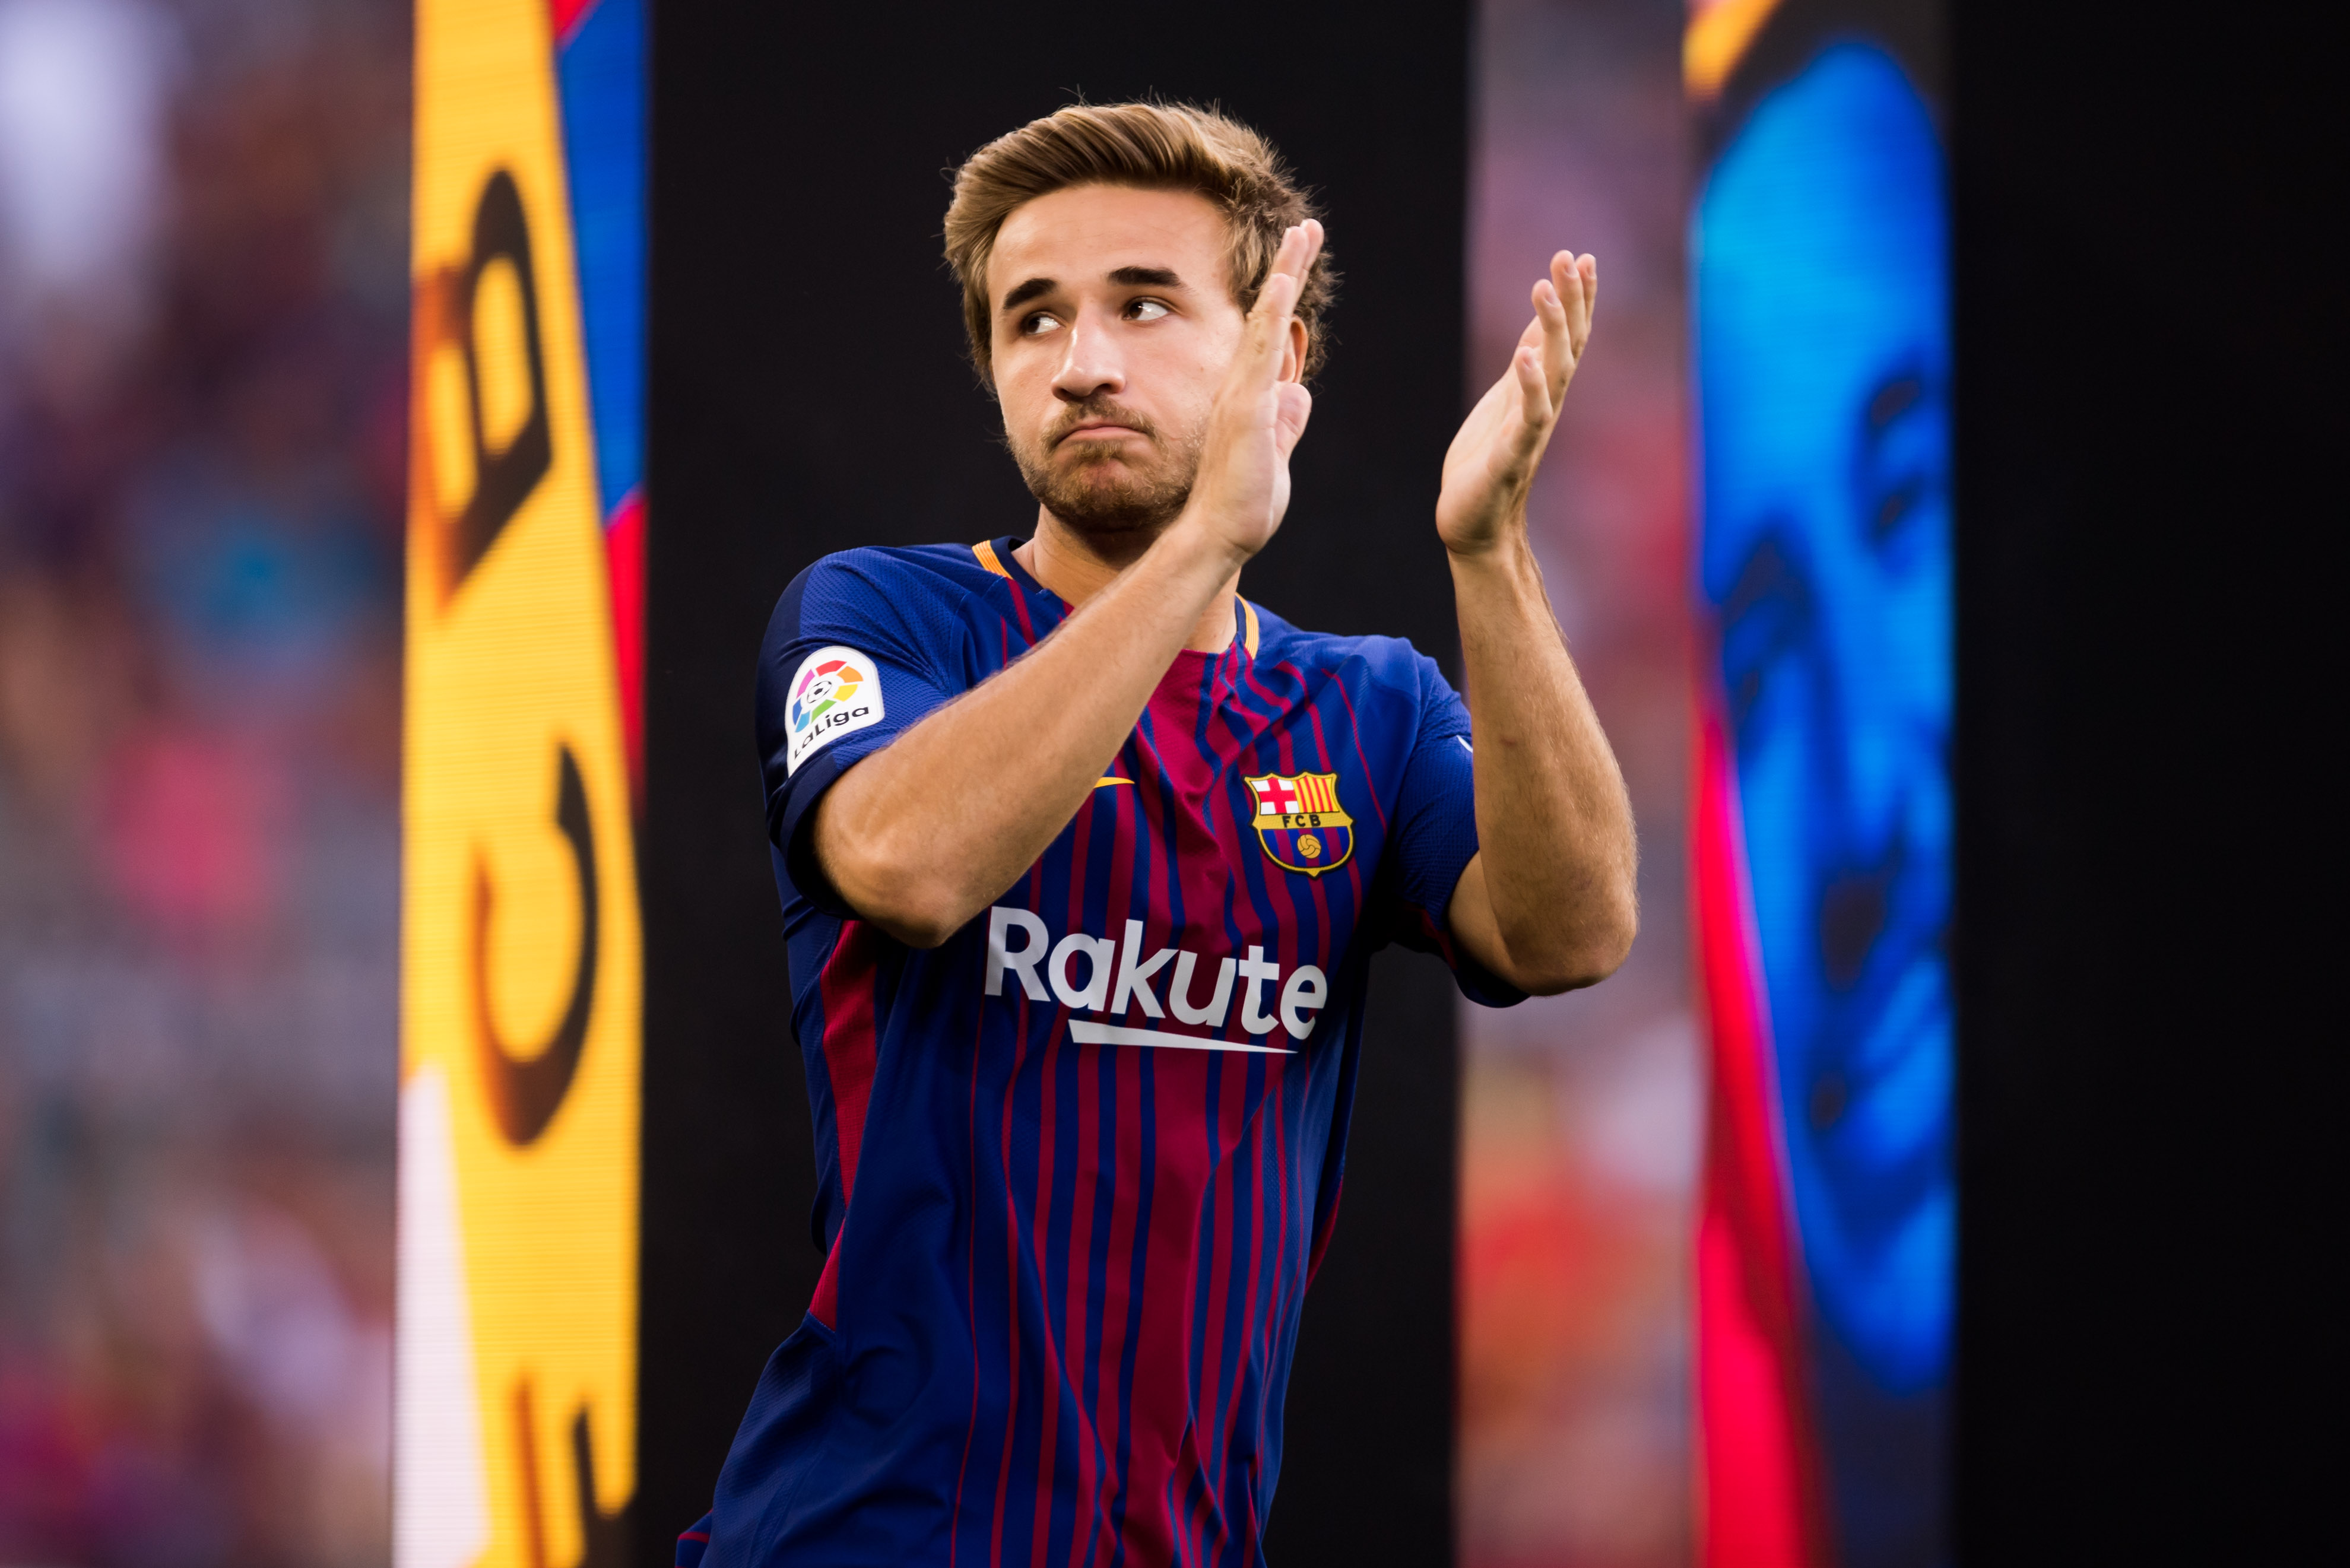 BARCELONA, SPAIN - AUGUST 07: Sergi Samper of FC Barcelona enters the pitch ahead of the Joan Gamper Trophy match between FC Barcelona and Chapecoense at Camp Nou stadium on August 7, 2017 in Barcelona, Spain. (Photo by Alex Caparros/Getty Images)